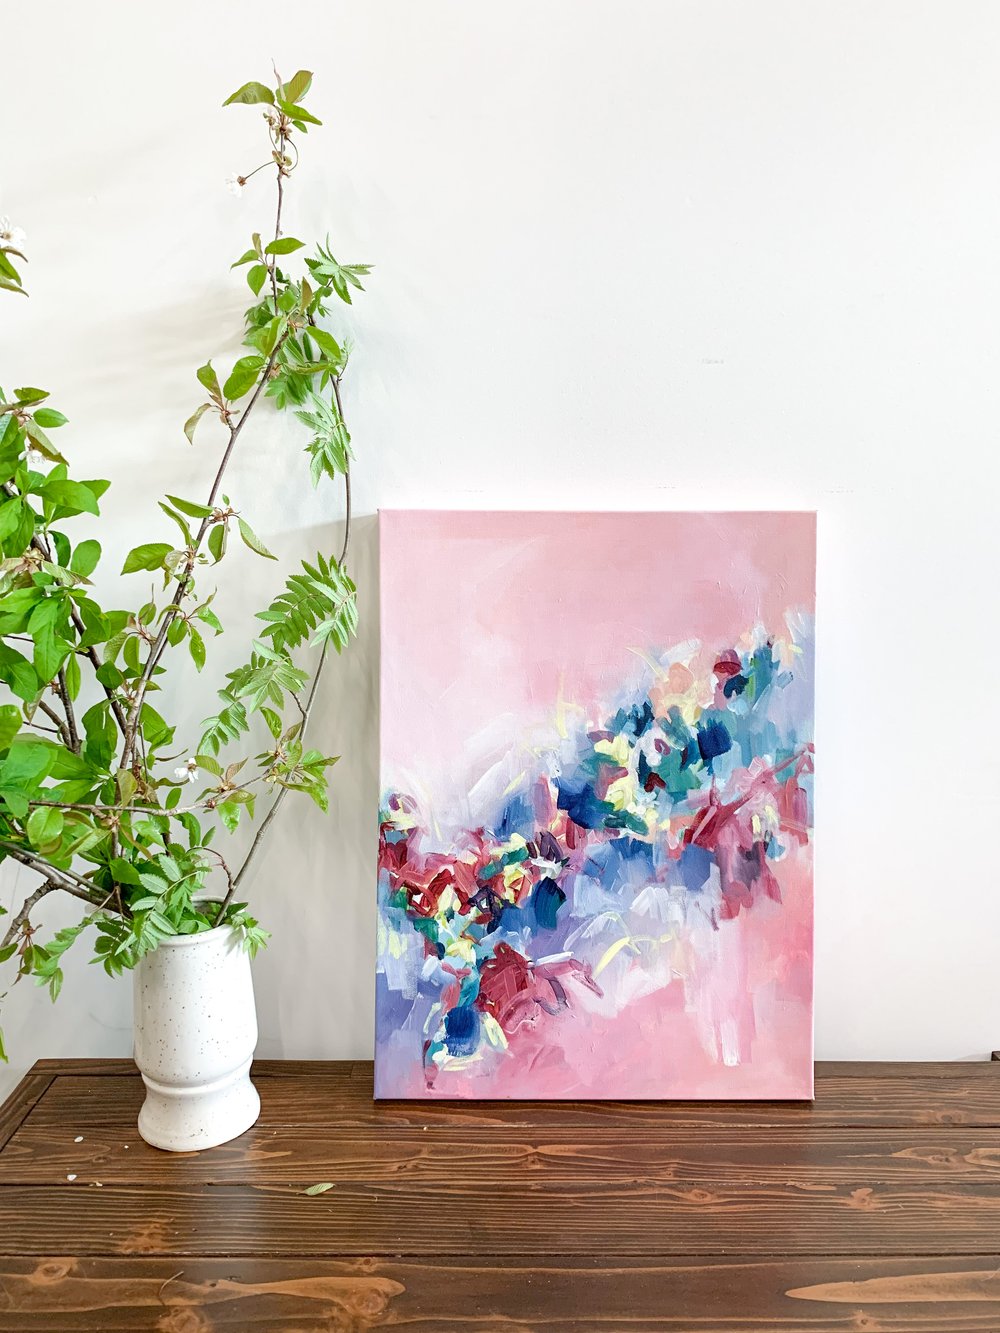 Early Spring Buds - 18x36 acrylic on canvas. Original painting by Kendra  Castillo — Kendra Castillo